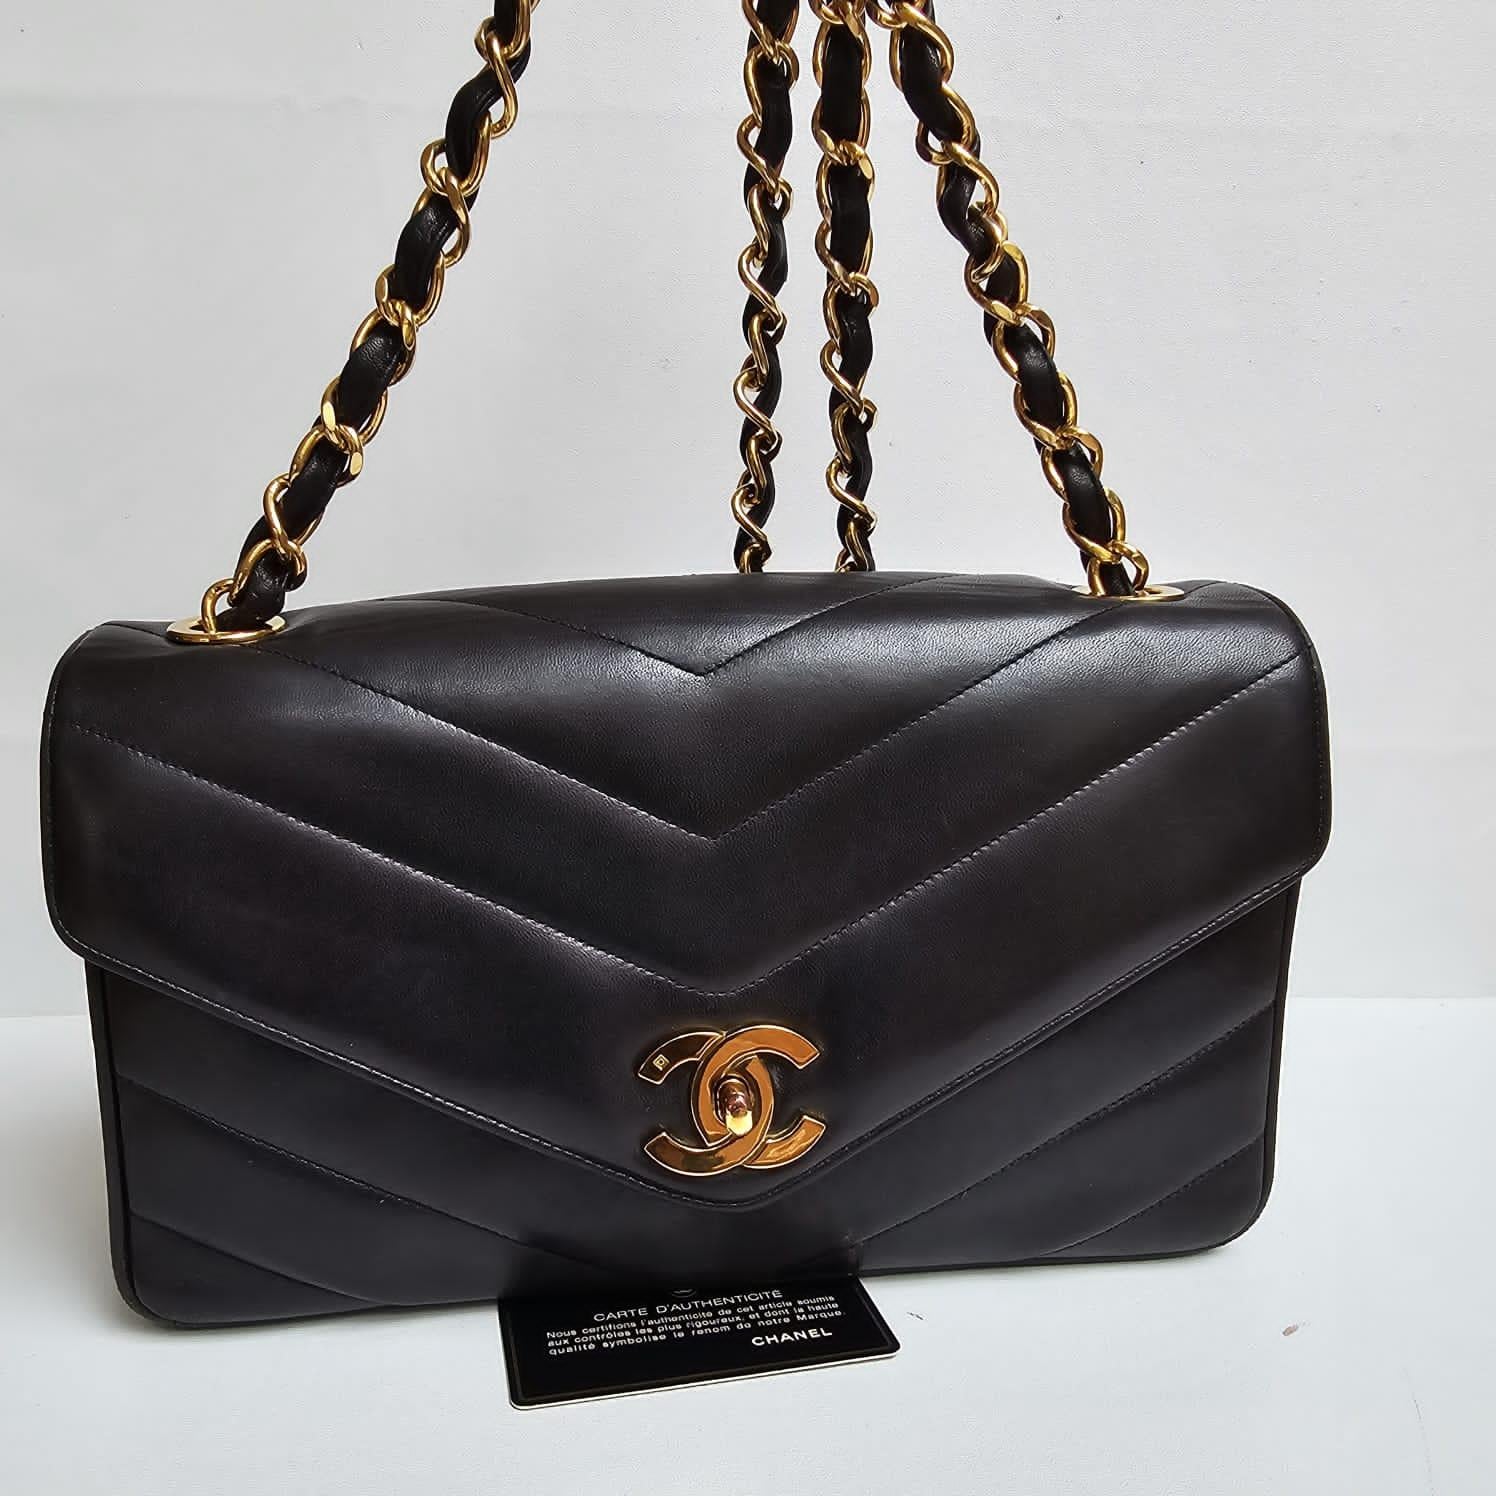 Rare Chanel vintage black chevron lambskin quilted flap bag. Overall in great vintage condition, with minor rubbing on the corners. Series #3. Comes with holo sticker and card.